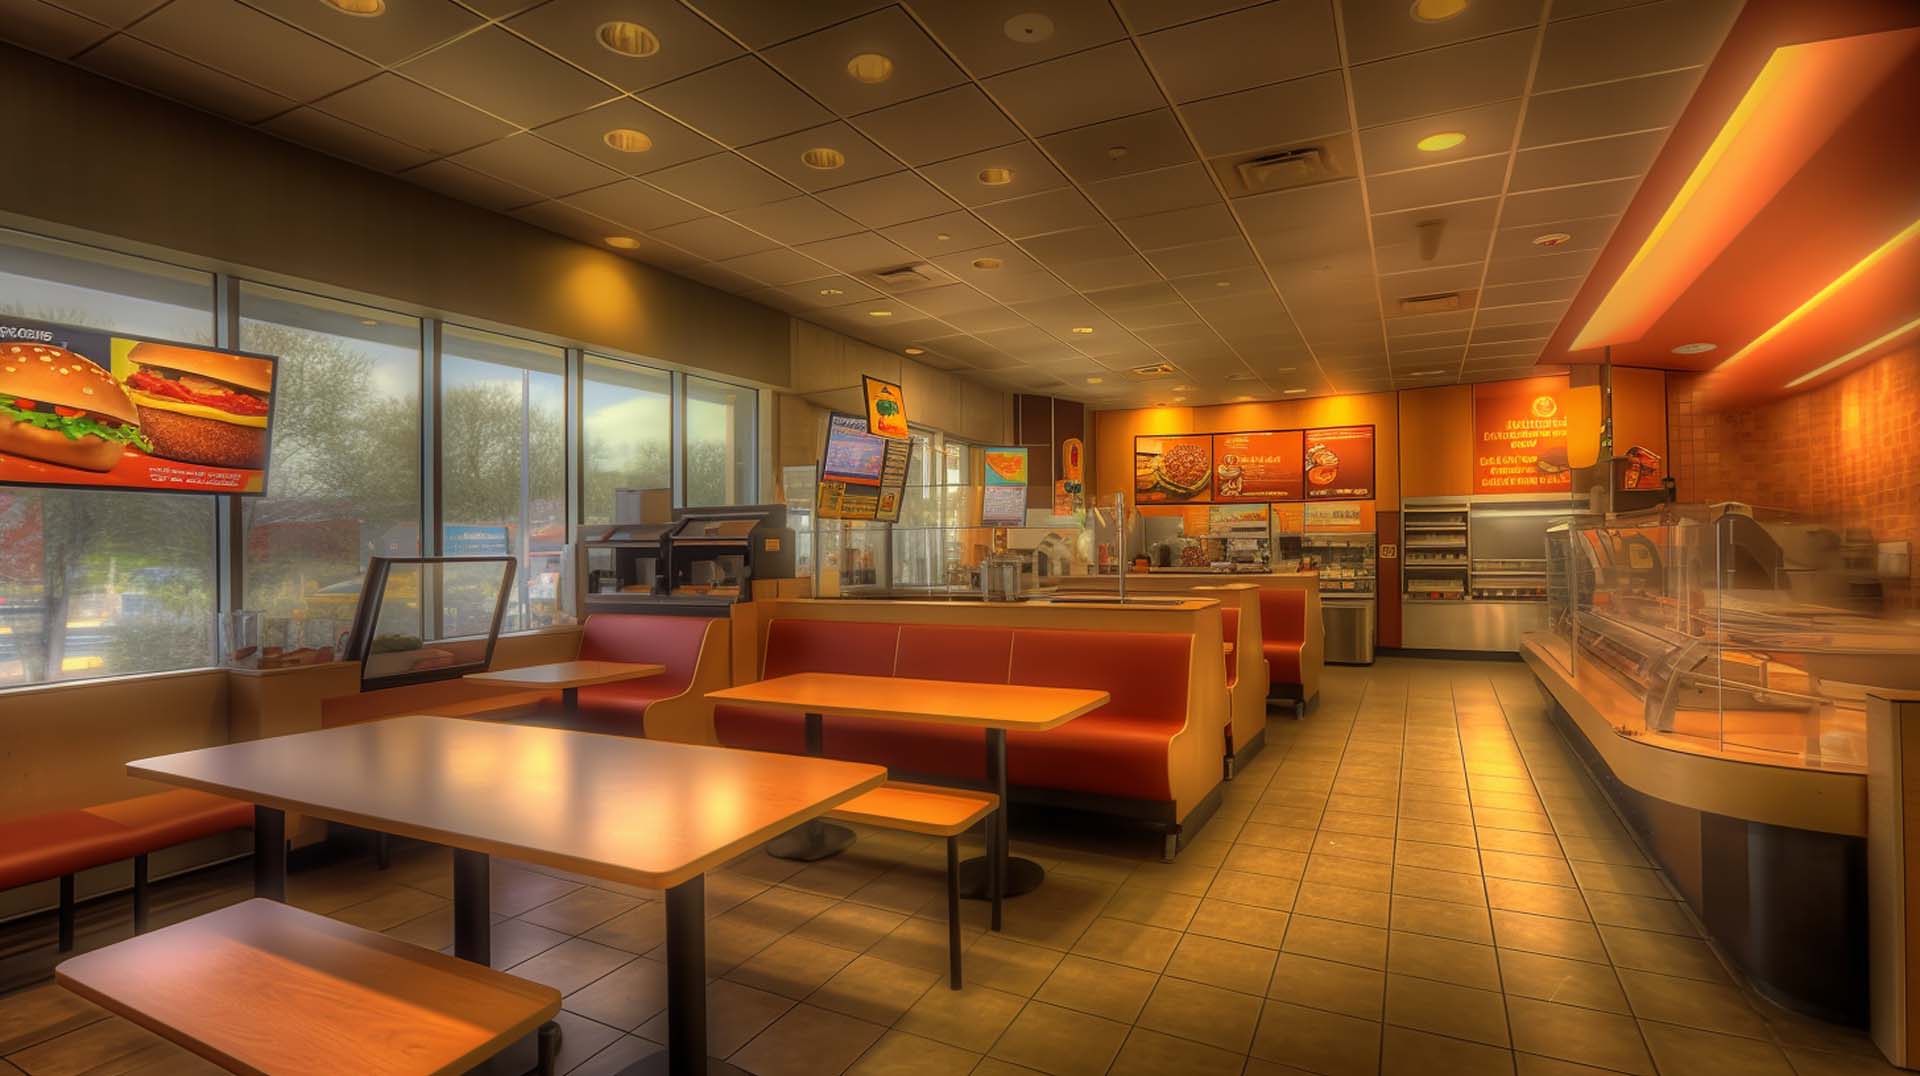 Greenville has a wide variety of delicious fast food options to choose from.